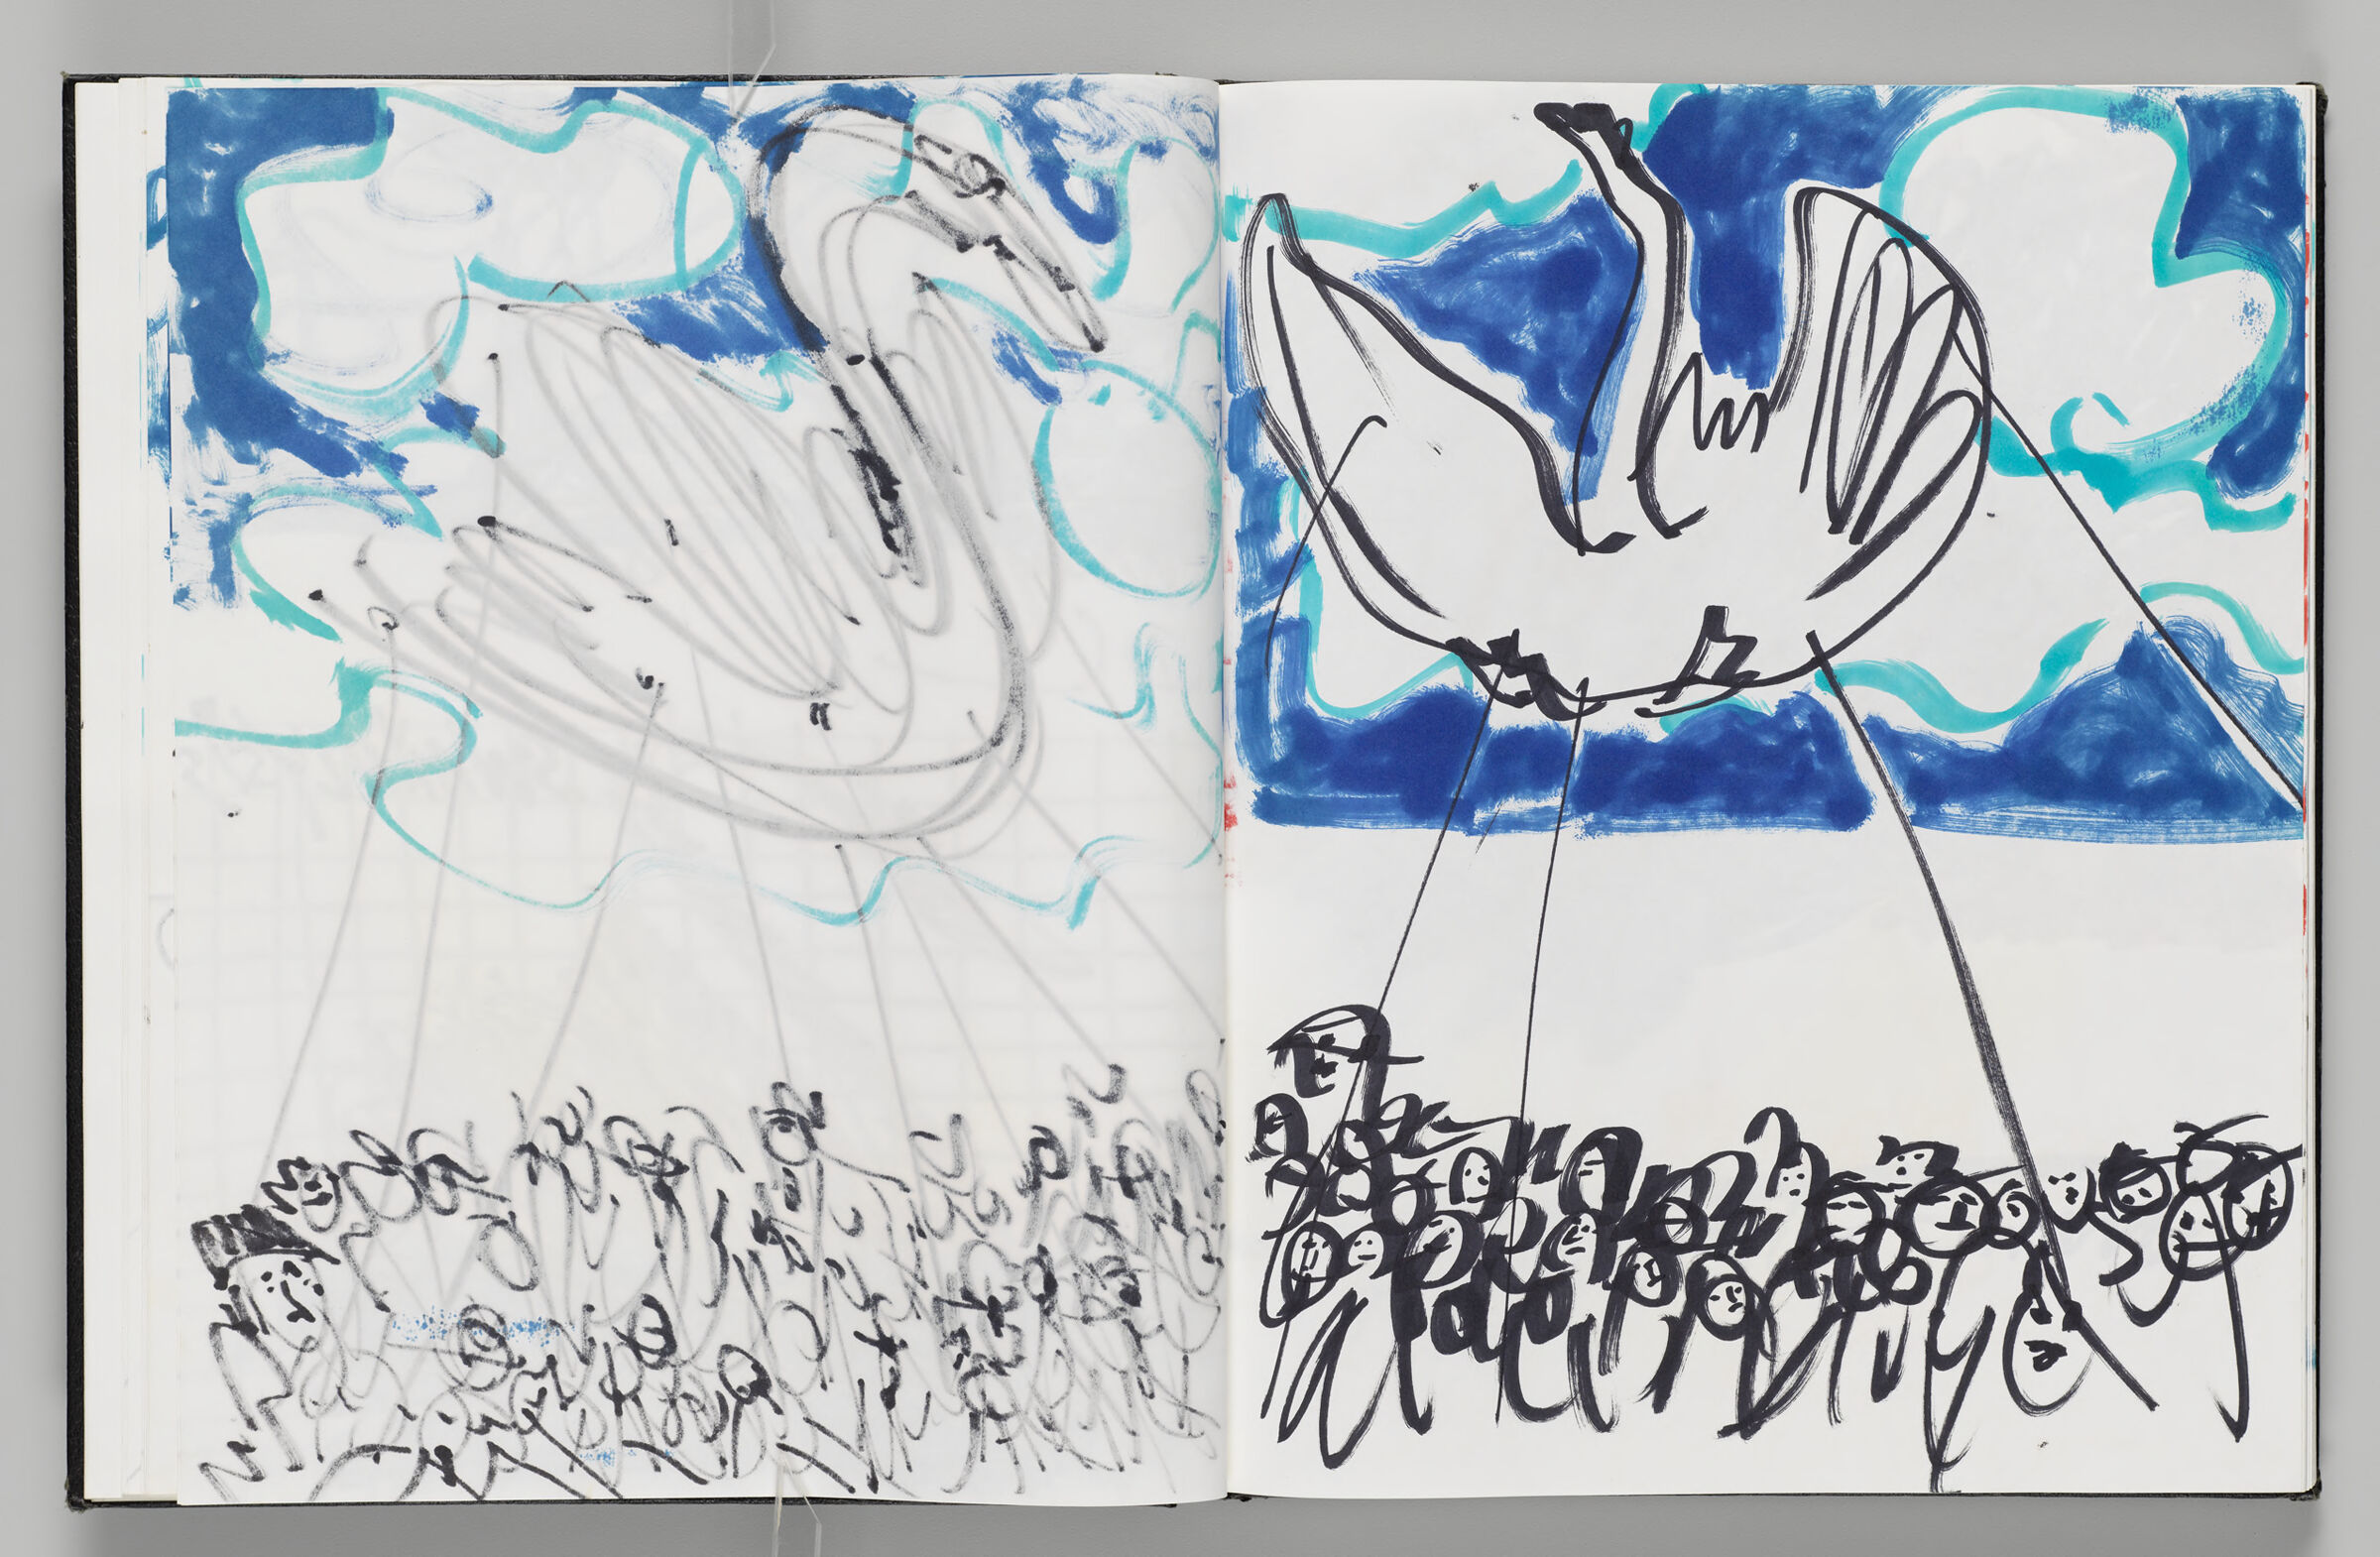 Untitled (Bleed-Through Of Previous Page, Left Page); Untitled (Swan Inflatable With Crowd, Right Page)